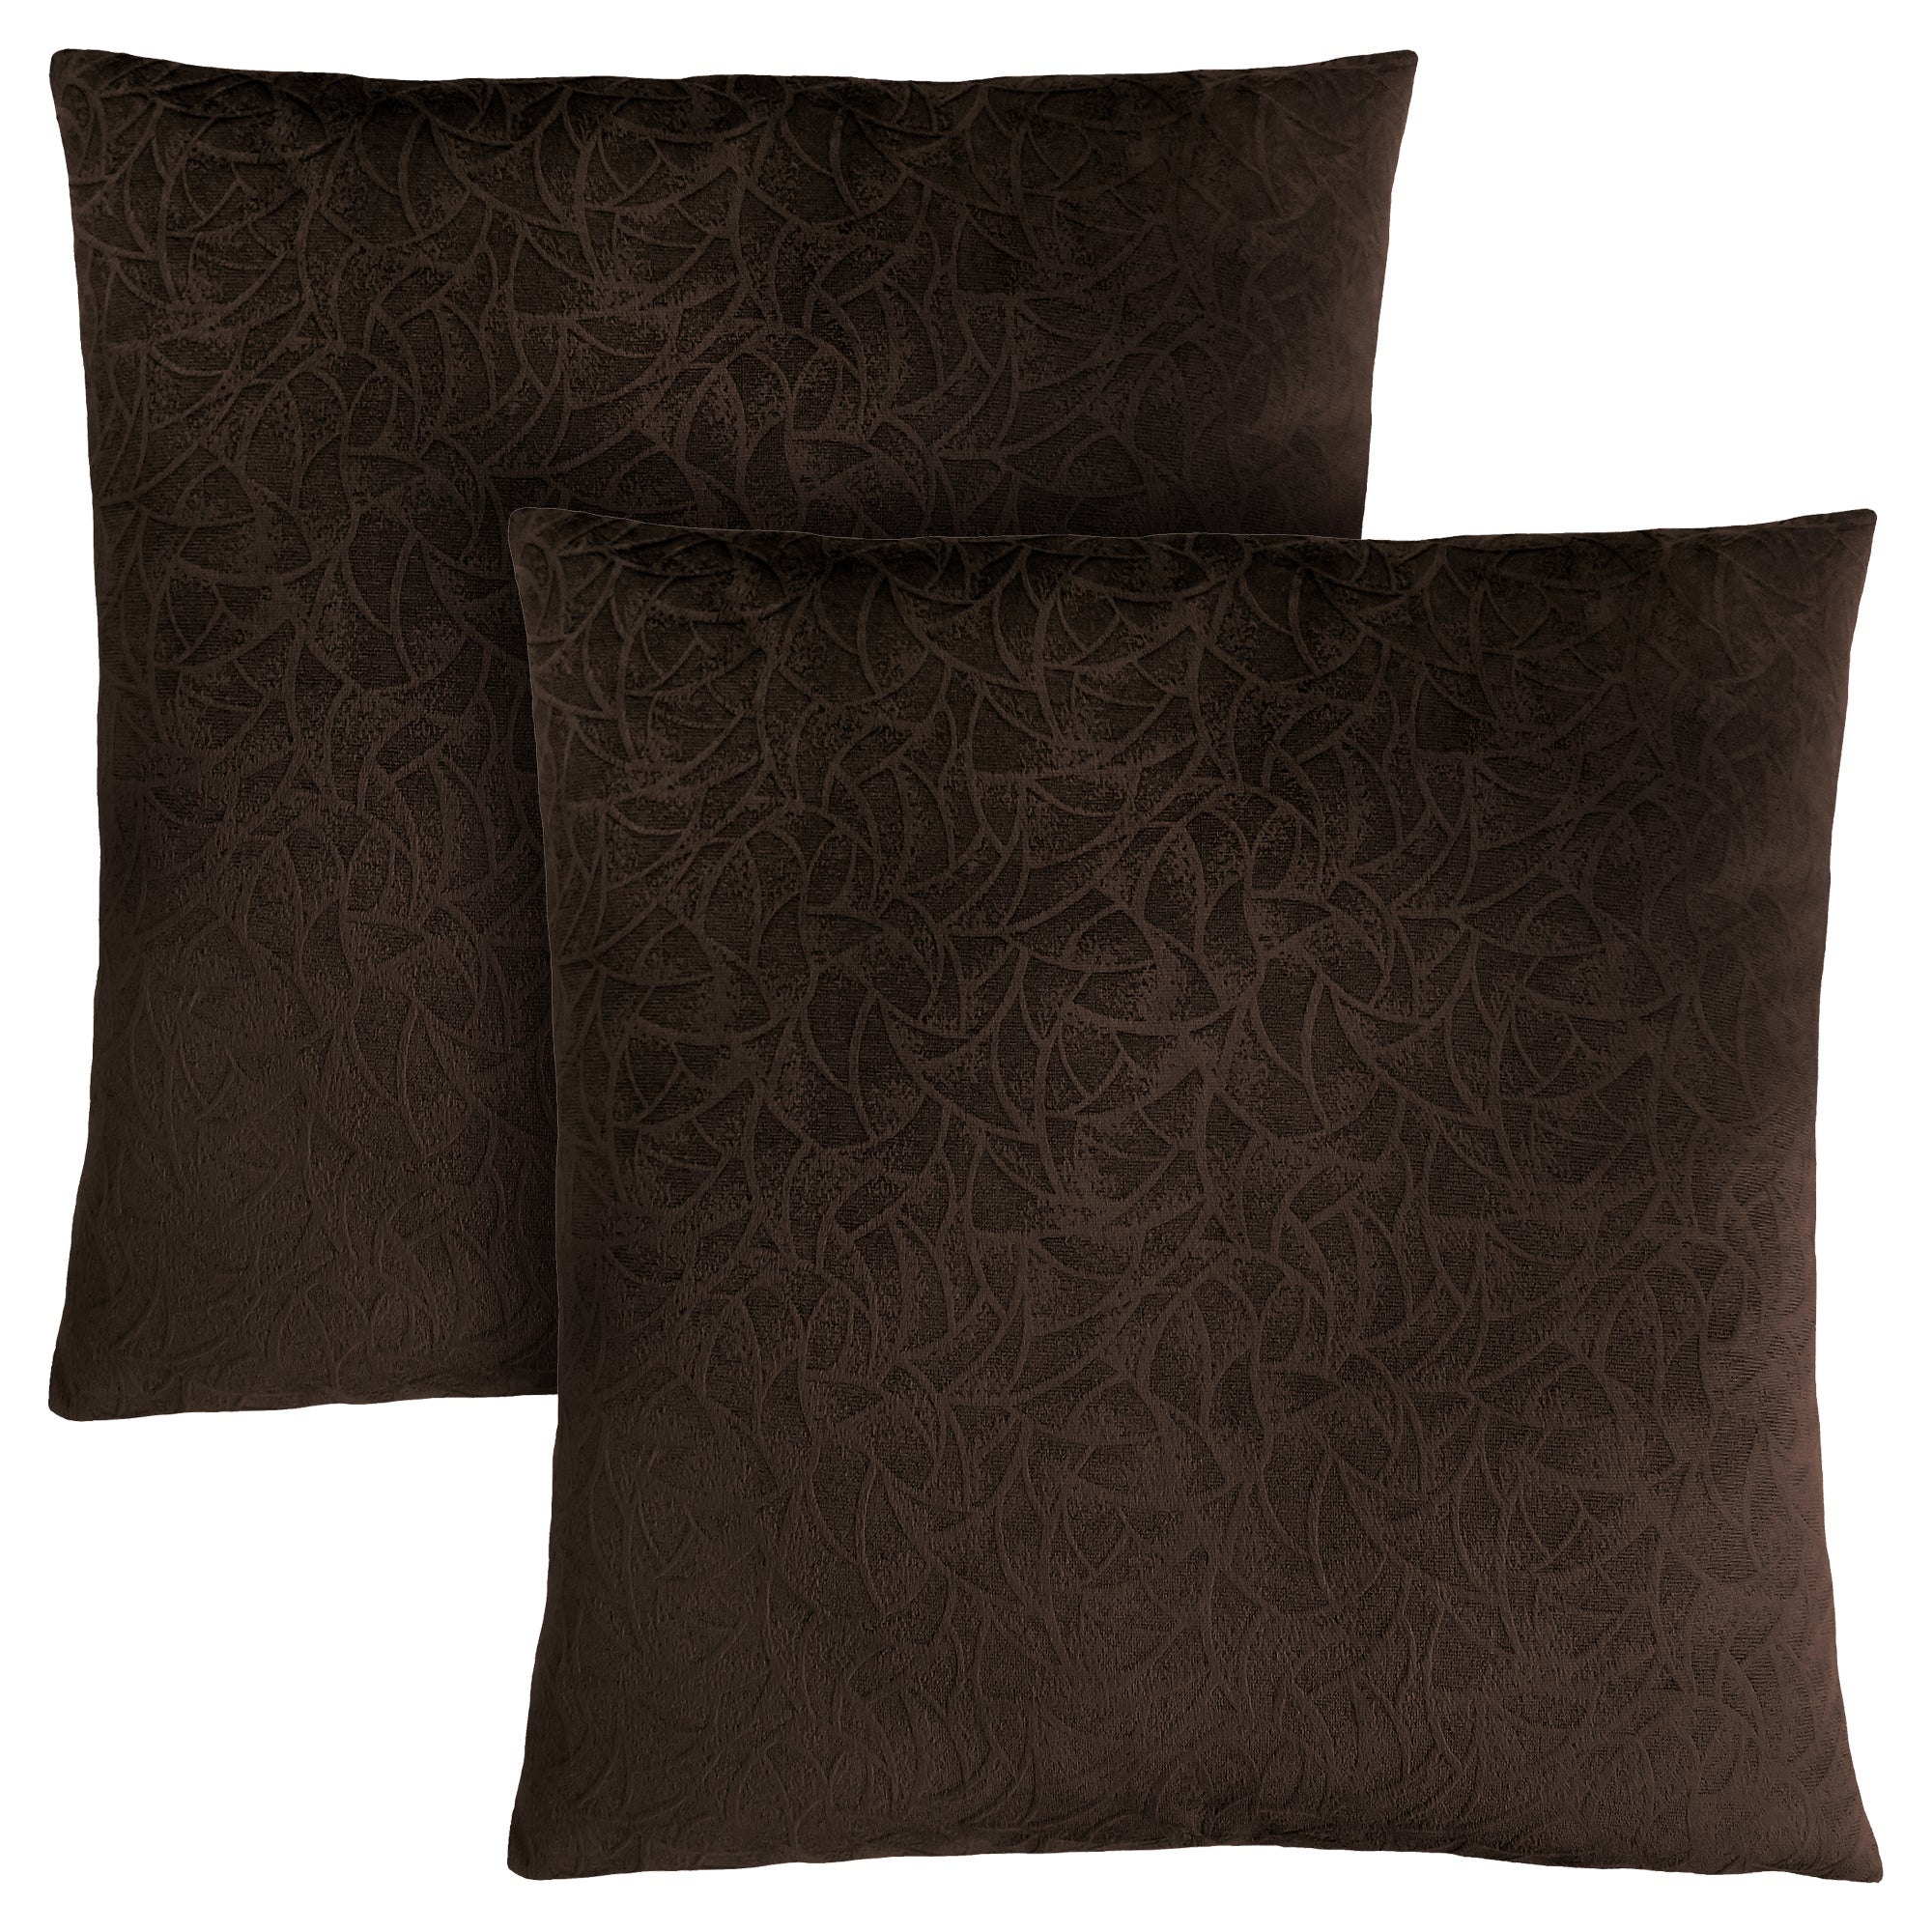 MN-639265    Pillows, Set Of 2, 18 X 18 Square, Insert Included, Decorative Throw, Accent, Sofa, Couch, Bed, Soft Polyester Woven Fabric, Hypoallergenic Soft Polyester Insert, Dark Brown, Transitional